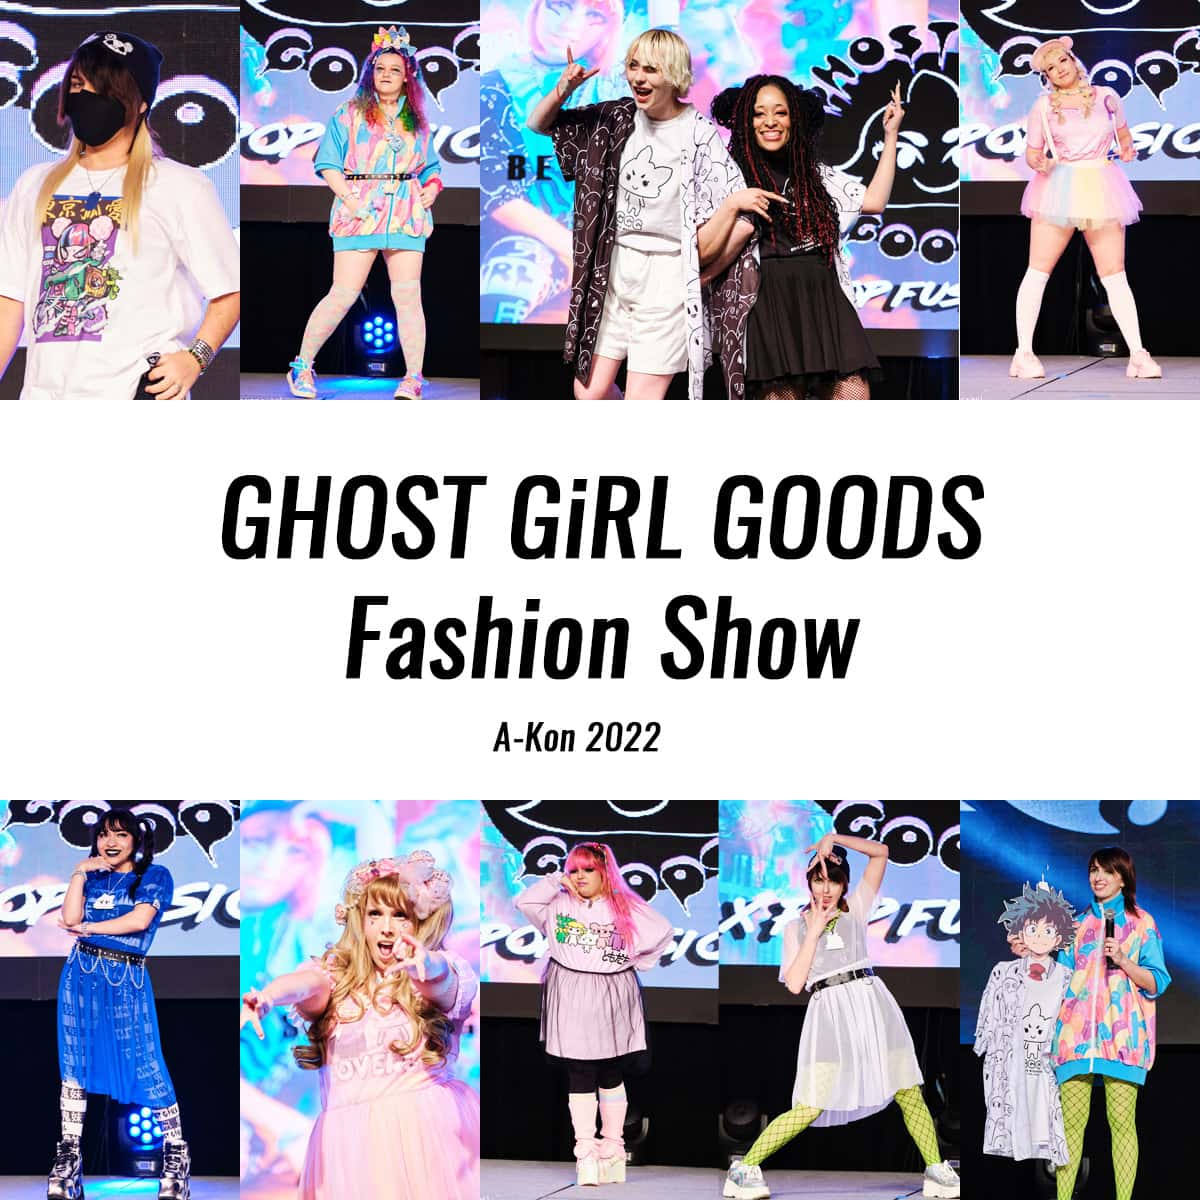 GHOST GiRL GOODS Fashion Show at A-Kon